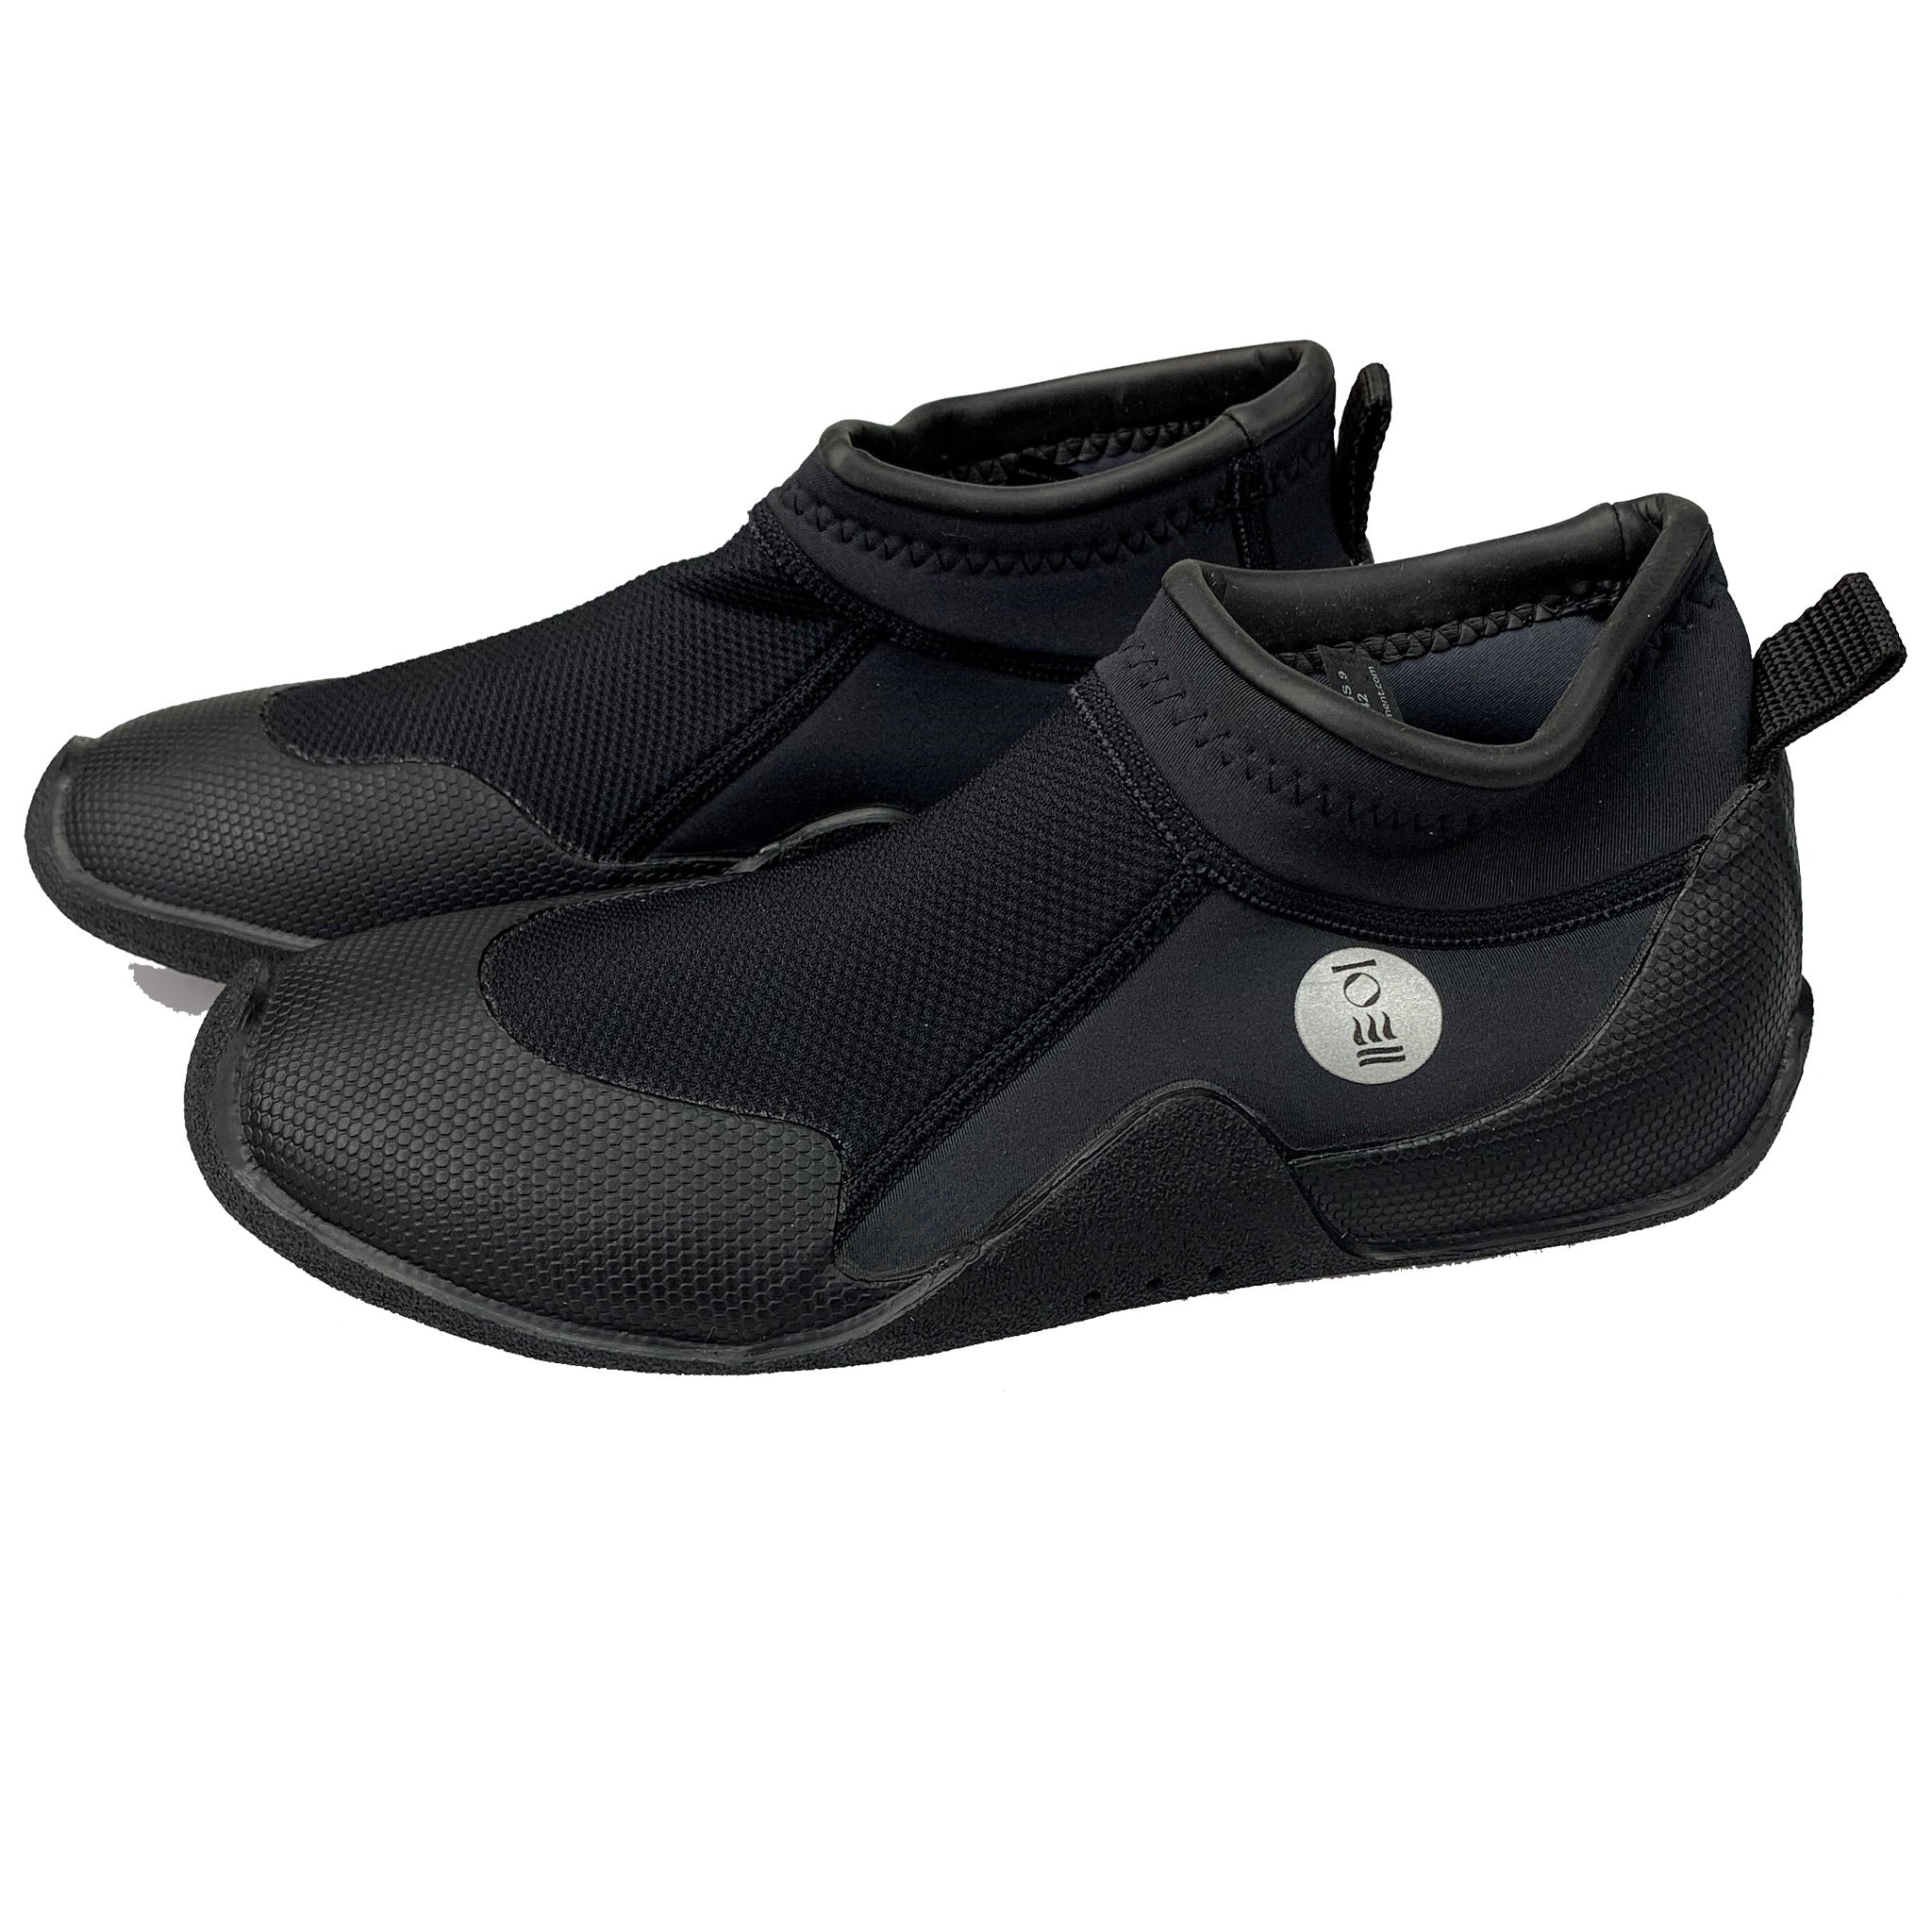 Fourth Element Rockhopper 3mm Wetsuit Watersports Shoes